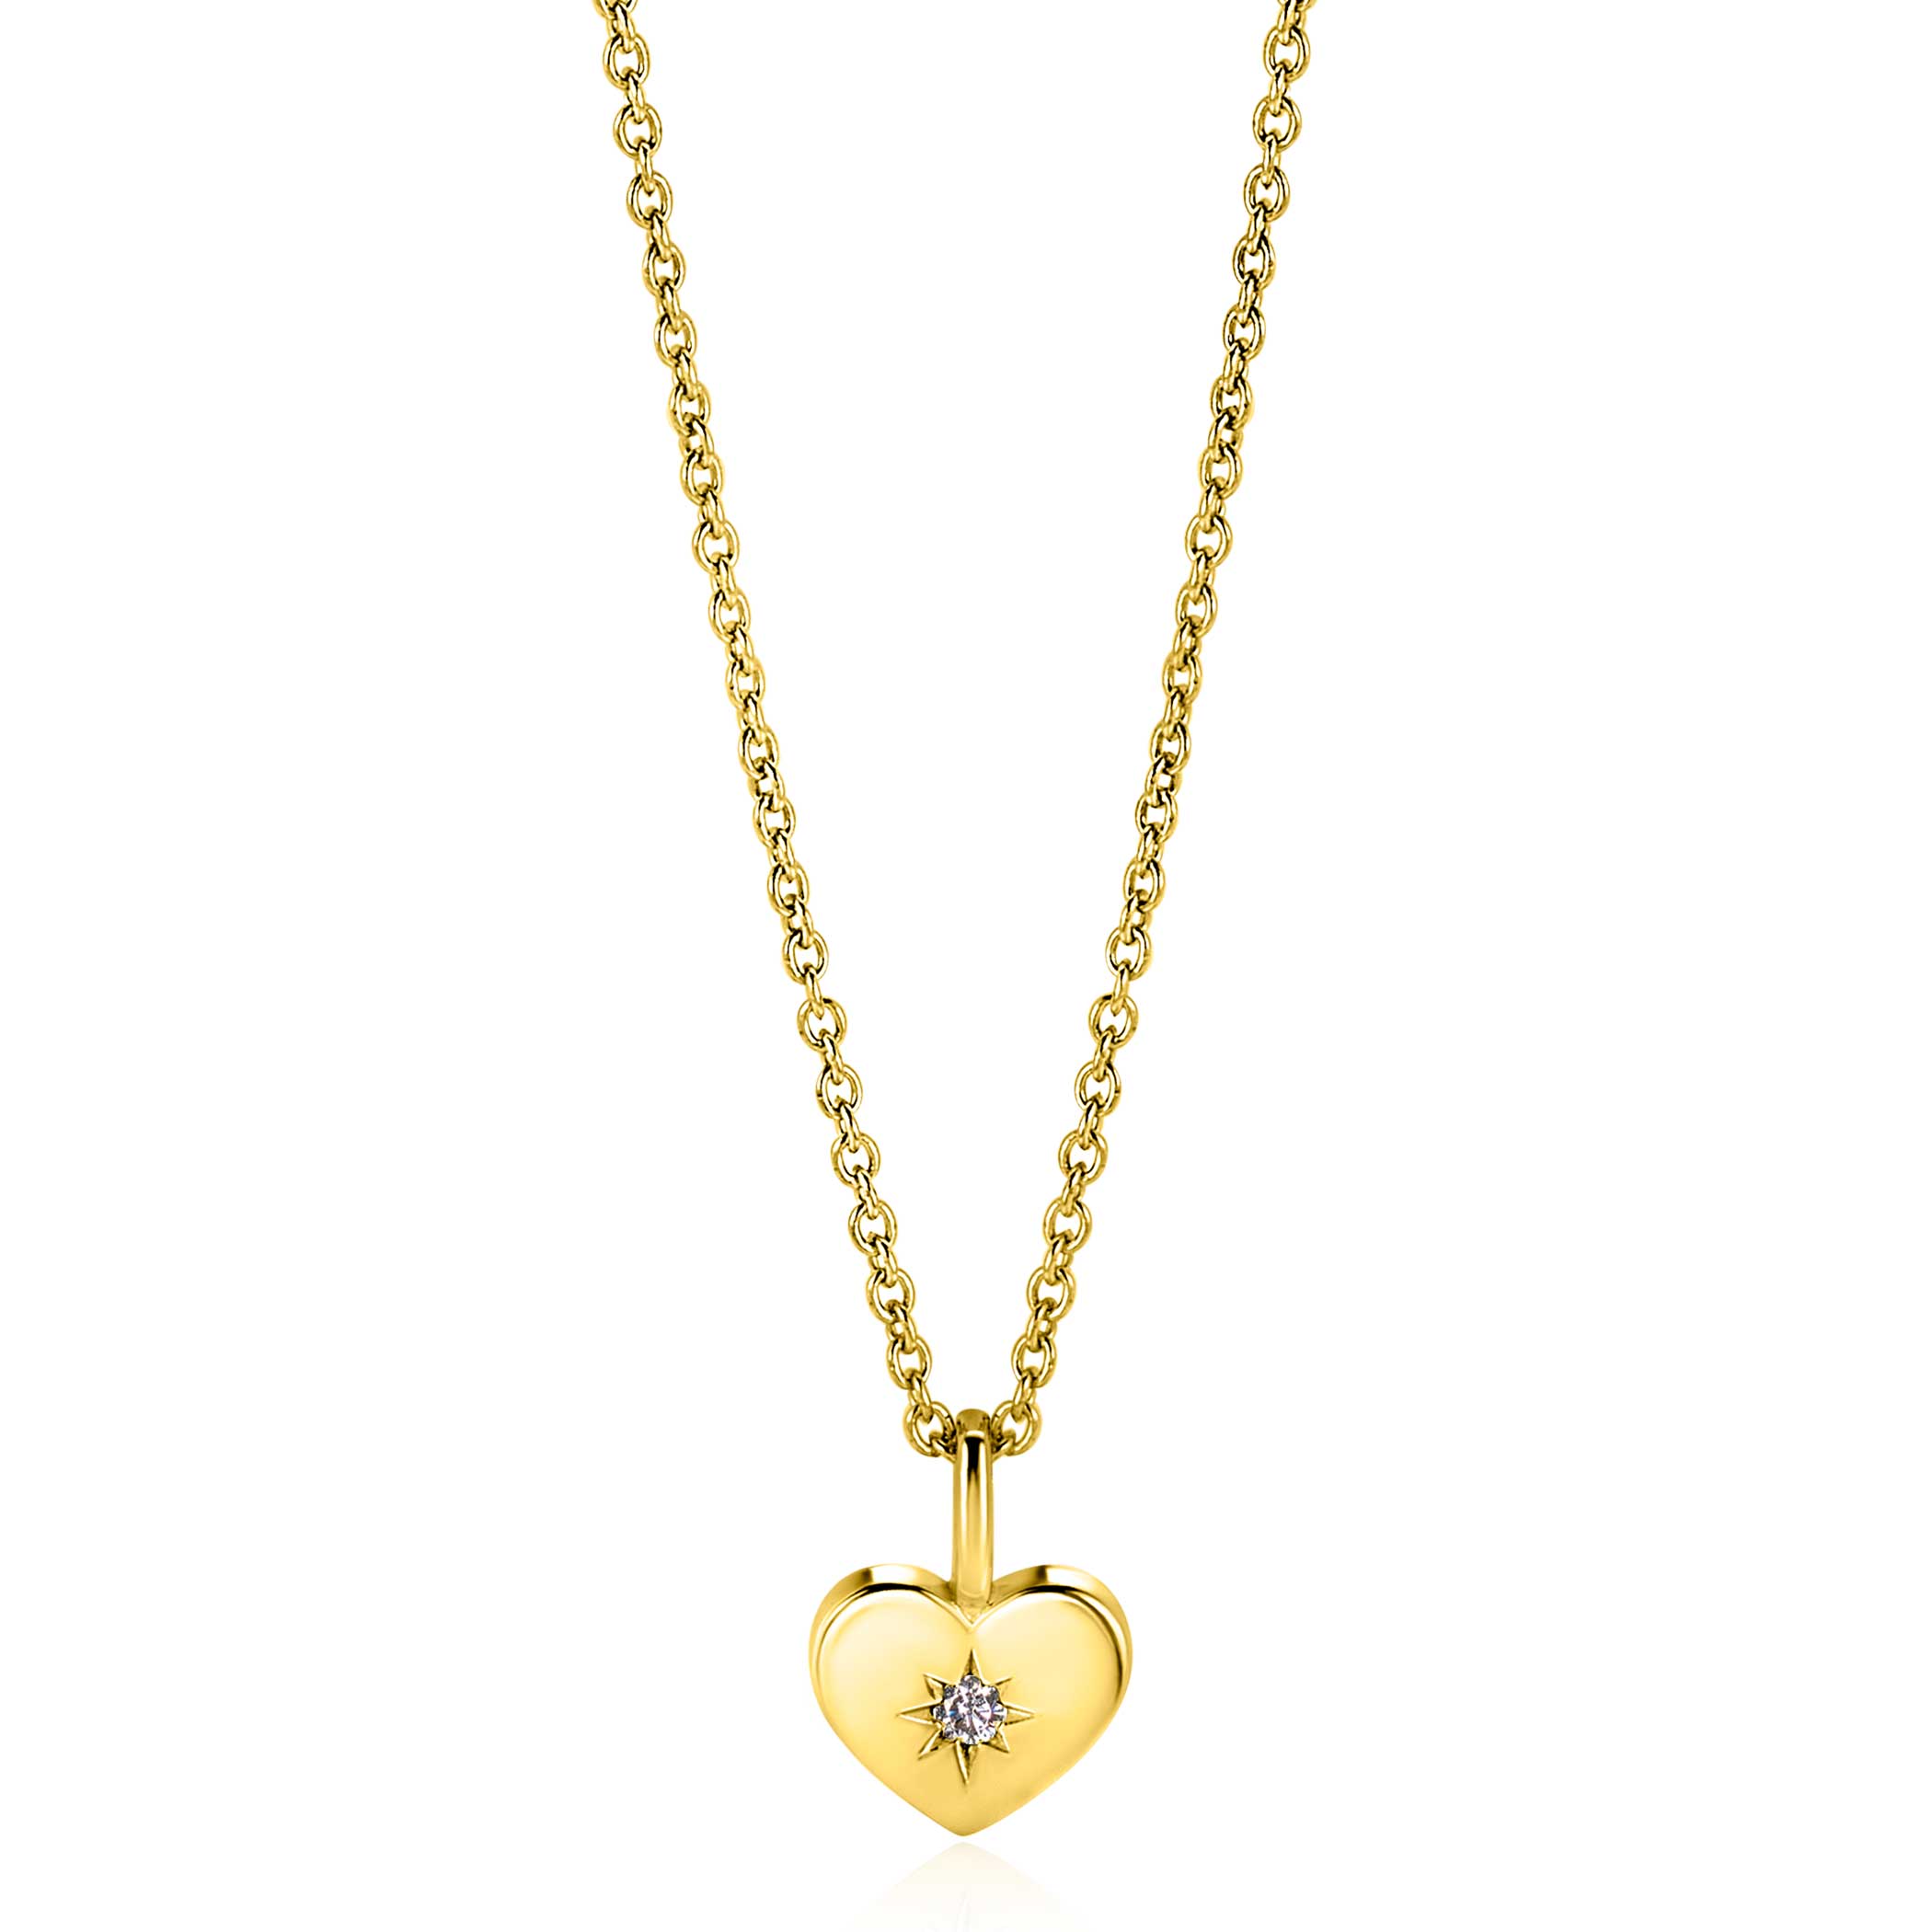 APRIL Pendant 12mm Gold Plated Heart Birthstone Diamond White Zirconia (excl. necklace)